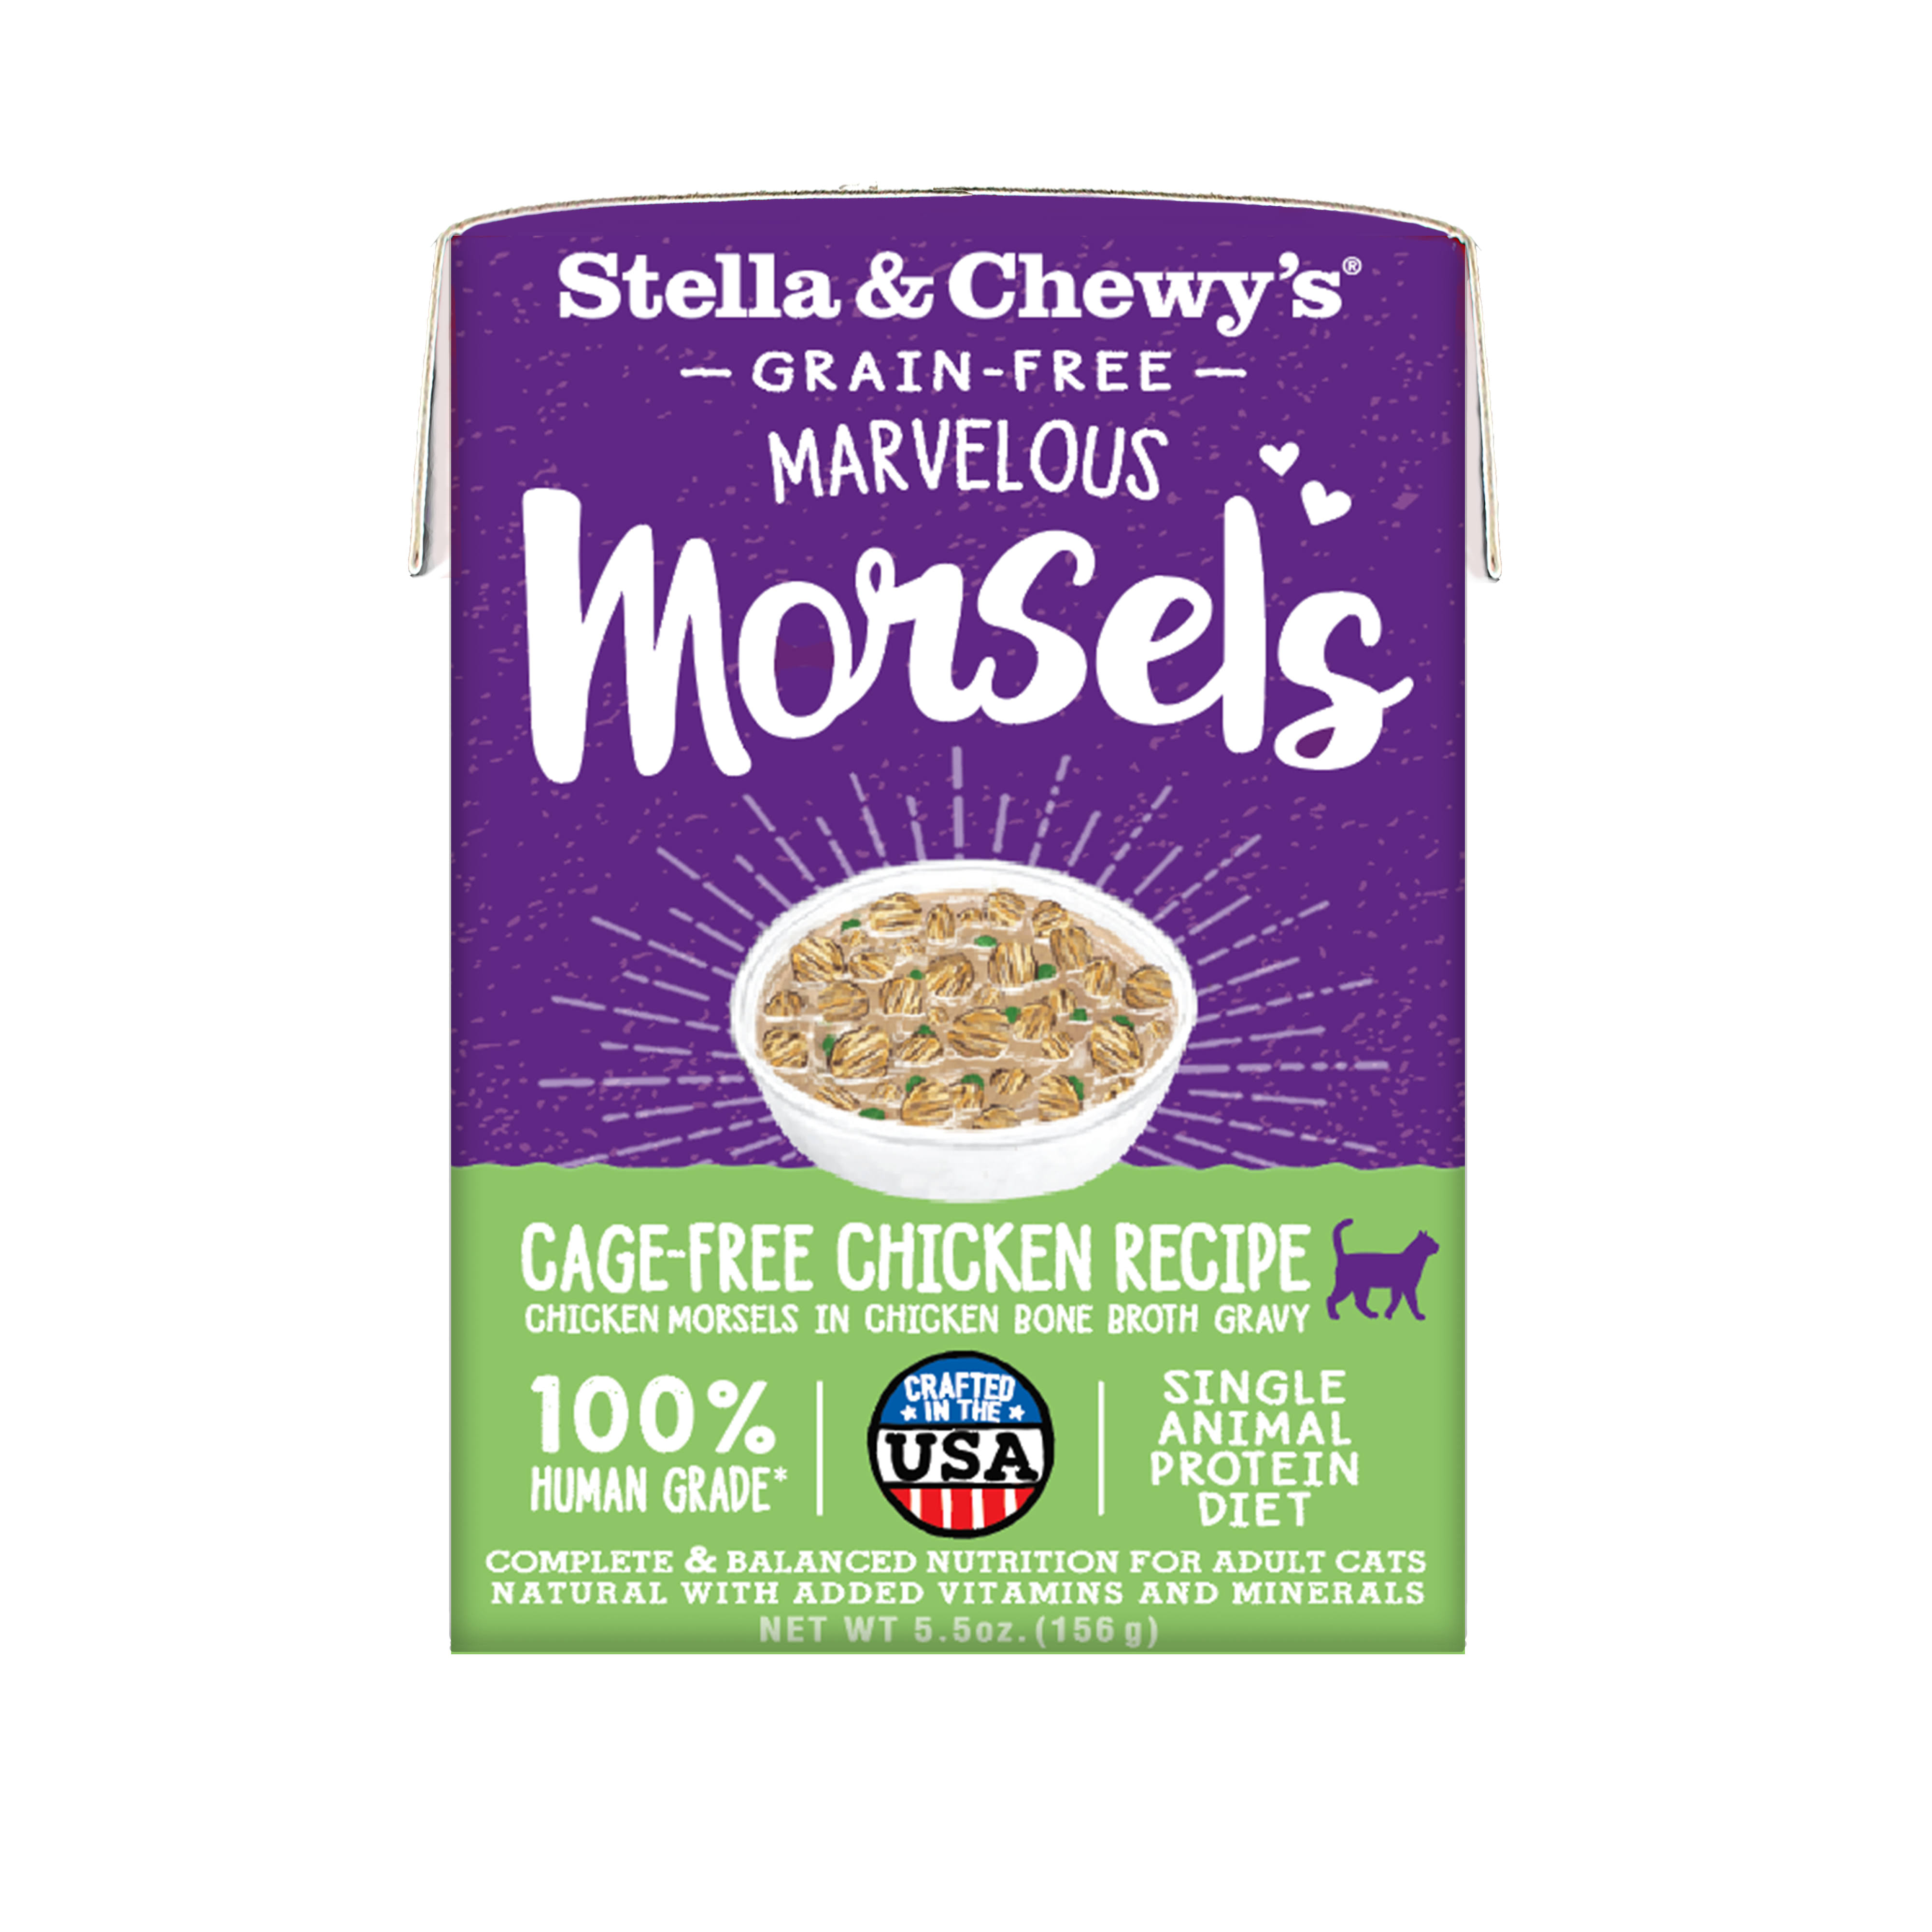 Stella & Chewy's Marvelous Morsels Cage-Free Chicken Recipe in Bone Broth Gravy Grain-Free Human Grade Wet Cat Food